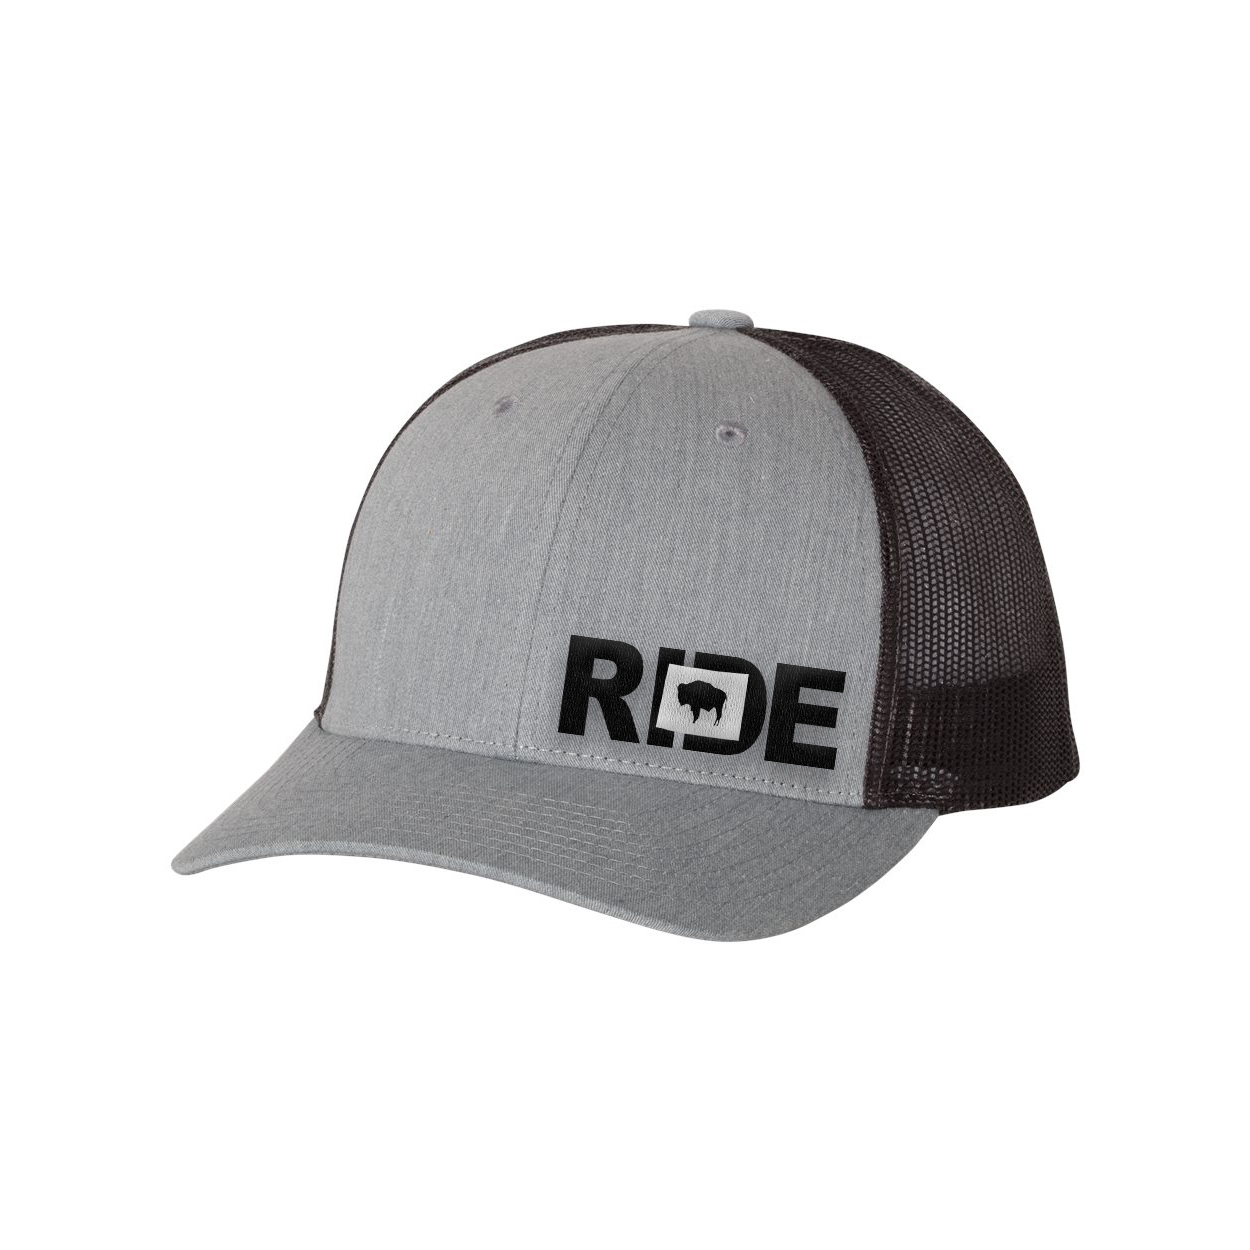 Ride Wyoming Night Out Embroidered Snapback Trucker Hat Heather Gray/Black